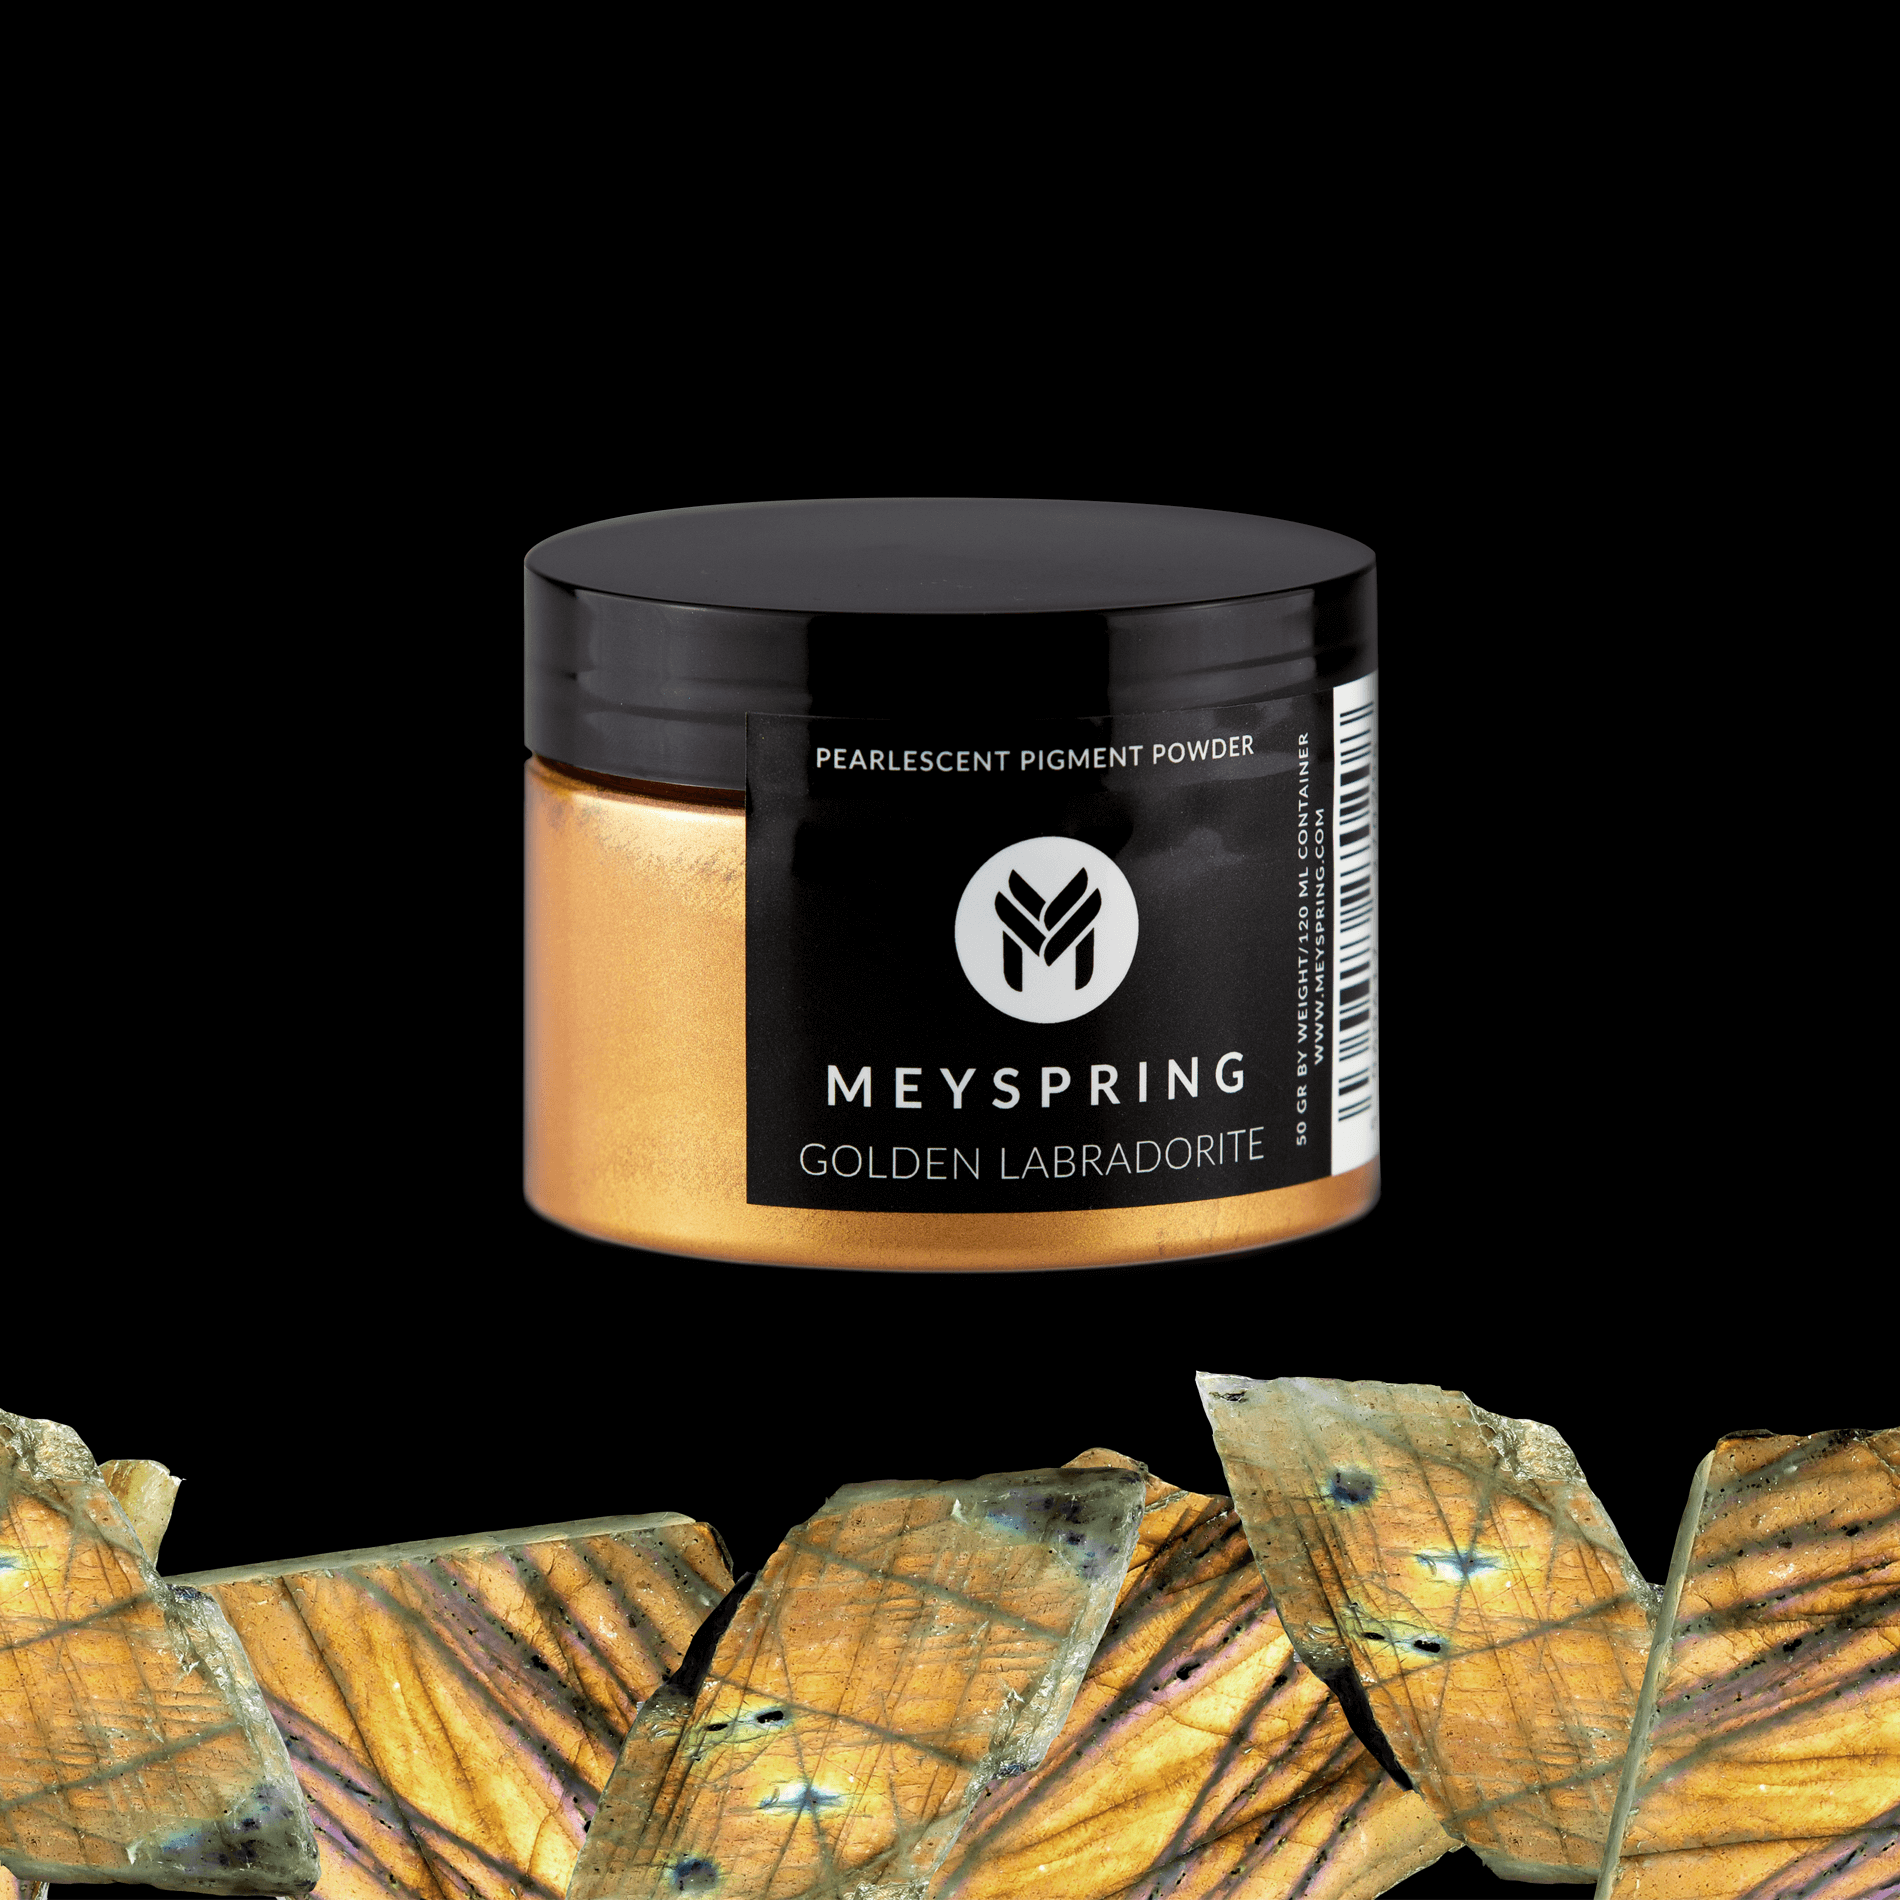  MEYSPRING Two Tone Collection - Mica Powder for Epoxy Resin -  New Generation of Epoxy Resin Color Pigment - 100% Mineral, Skin-Safe, and  Inert Pigment Powder for Epoxy Resin (Pigment Powder